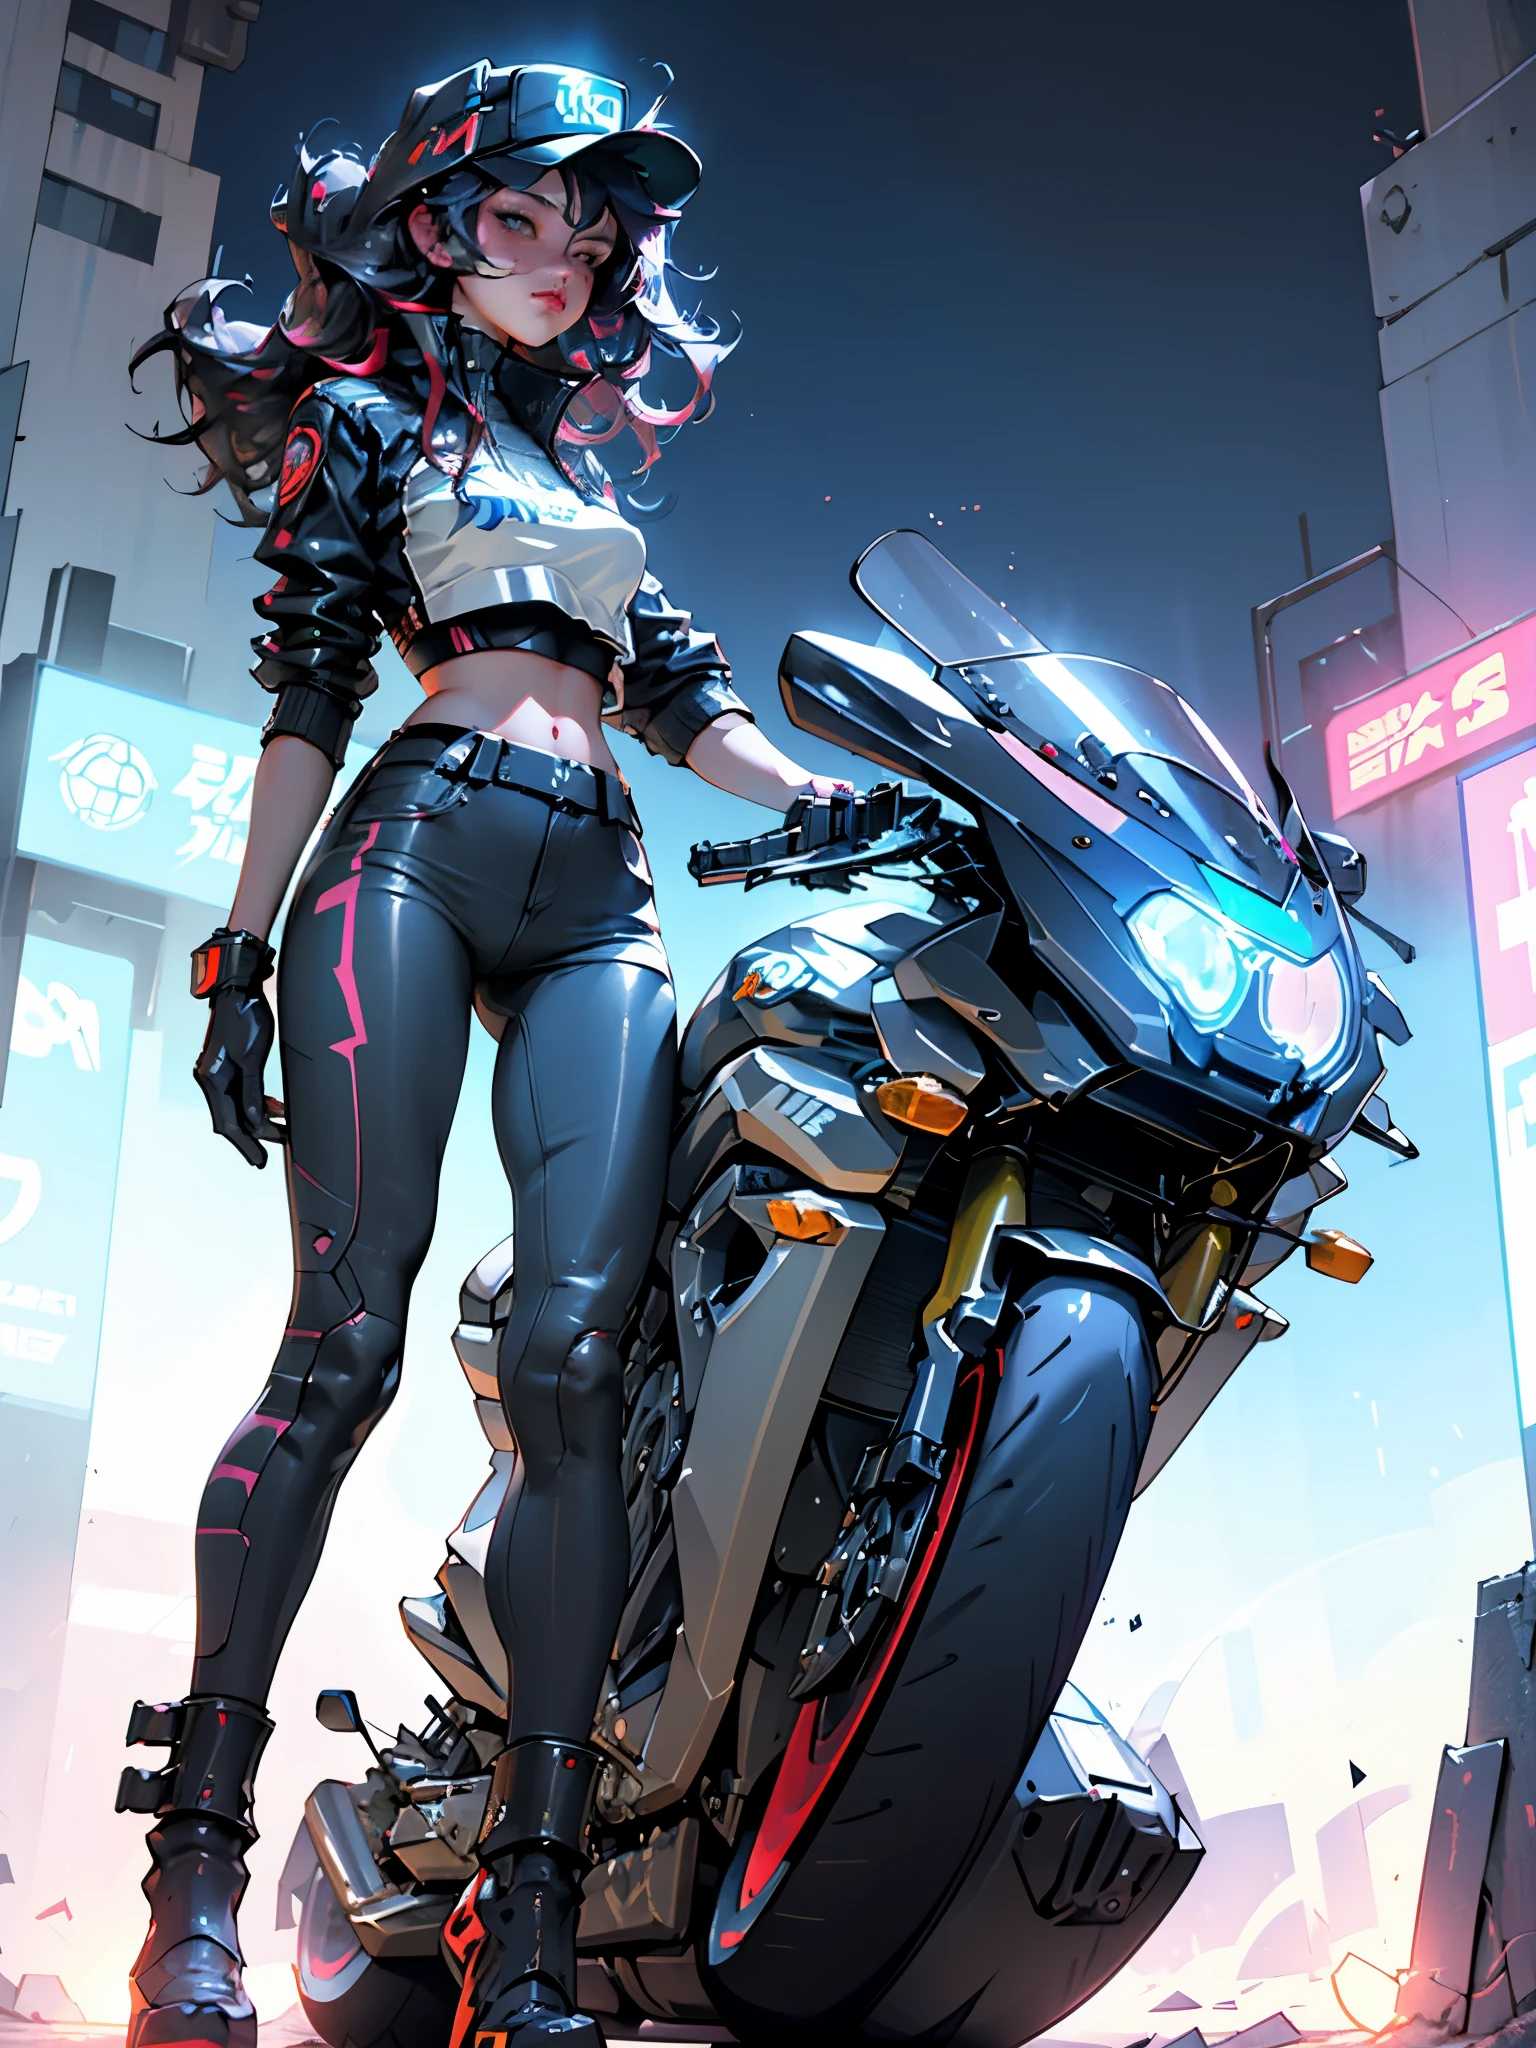 beautiful woman medium hair, Wear a hat, cyberpunk short clothes, cyberpunk police woman, Tomboy, Traffic police, (Riding a futuristic motorcycle 1.0), Police Hovercycle Patrol, night, neon